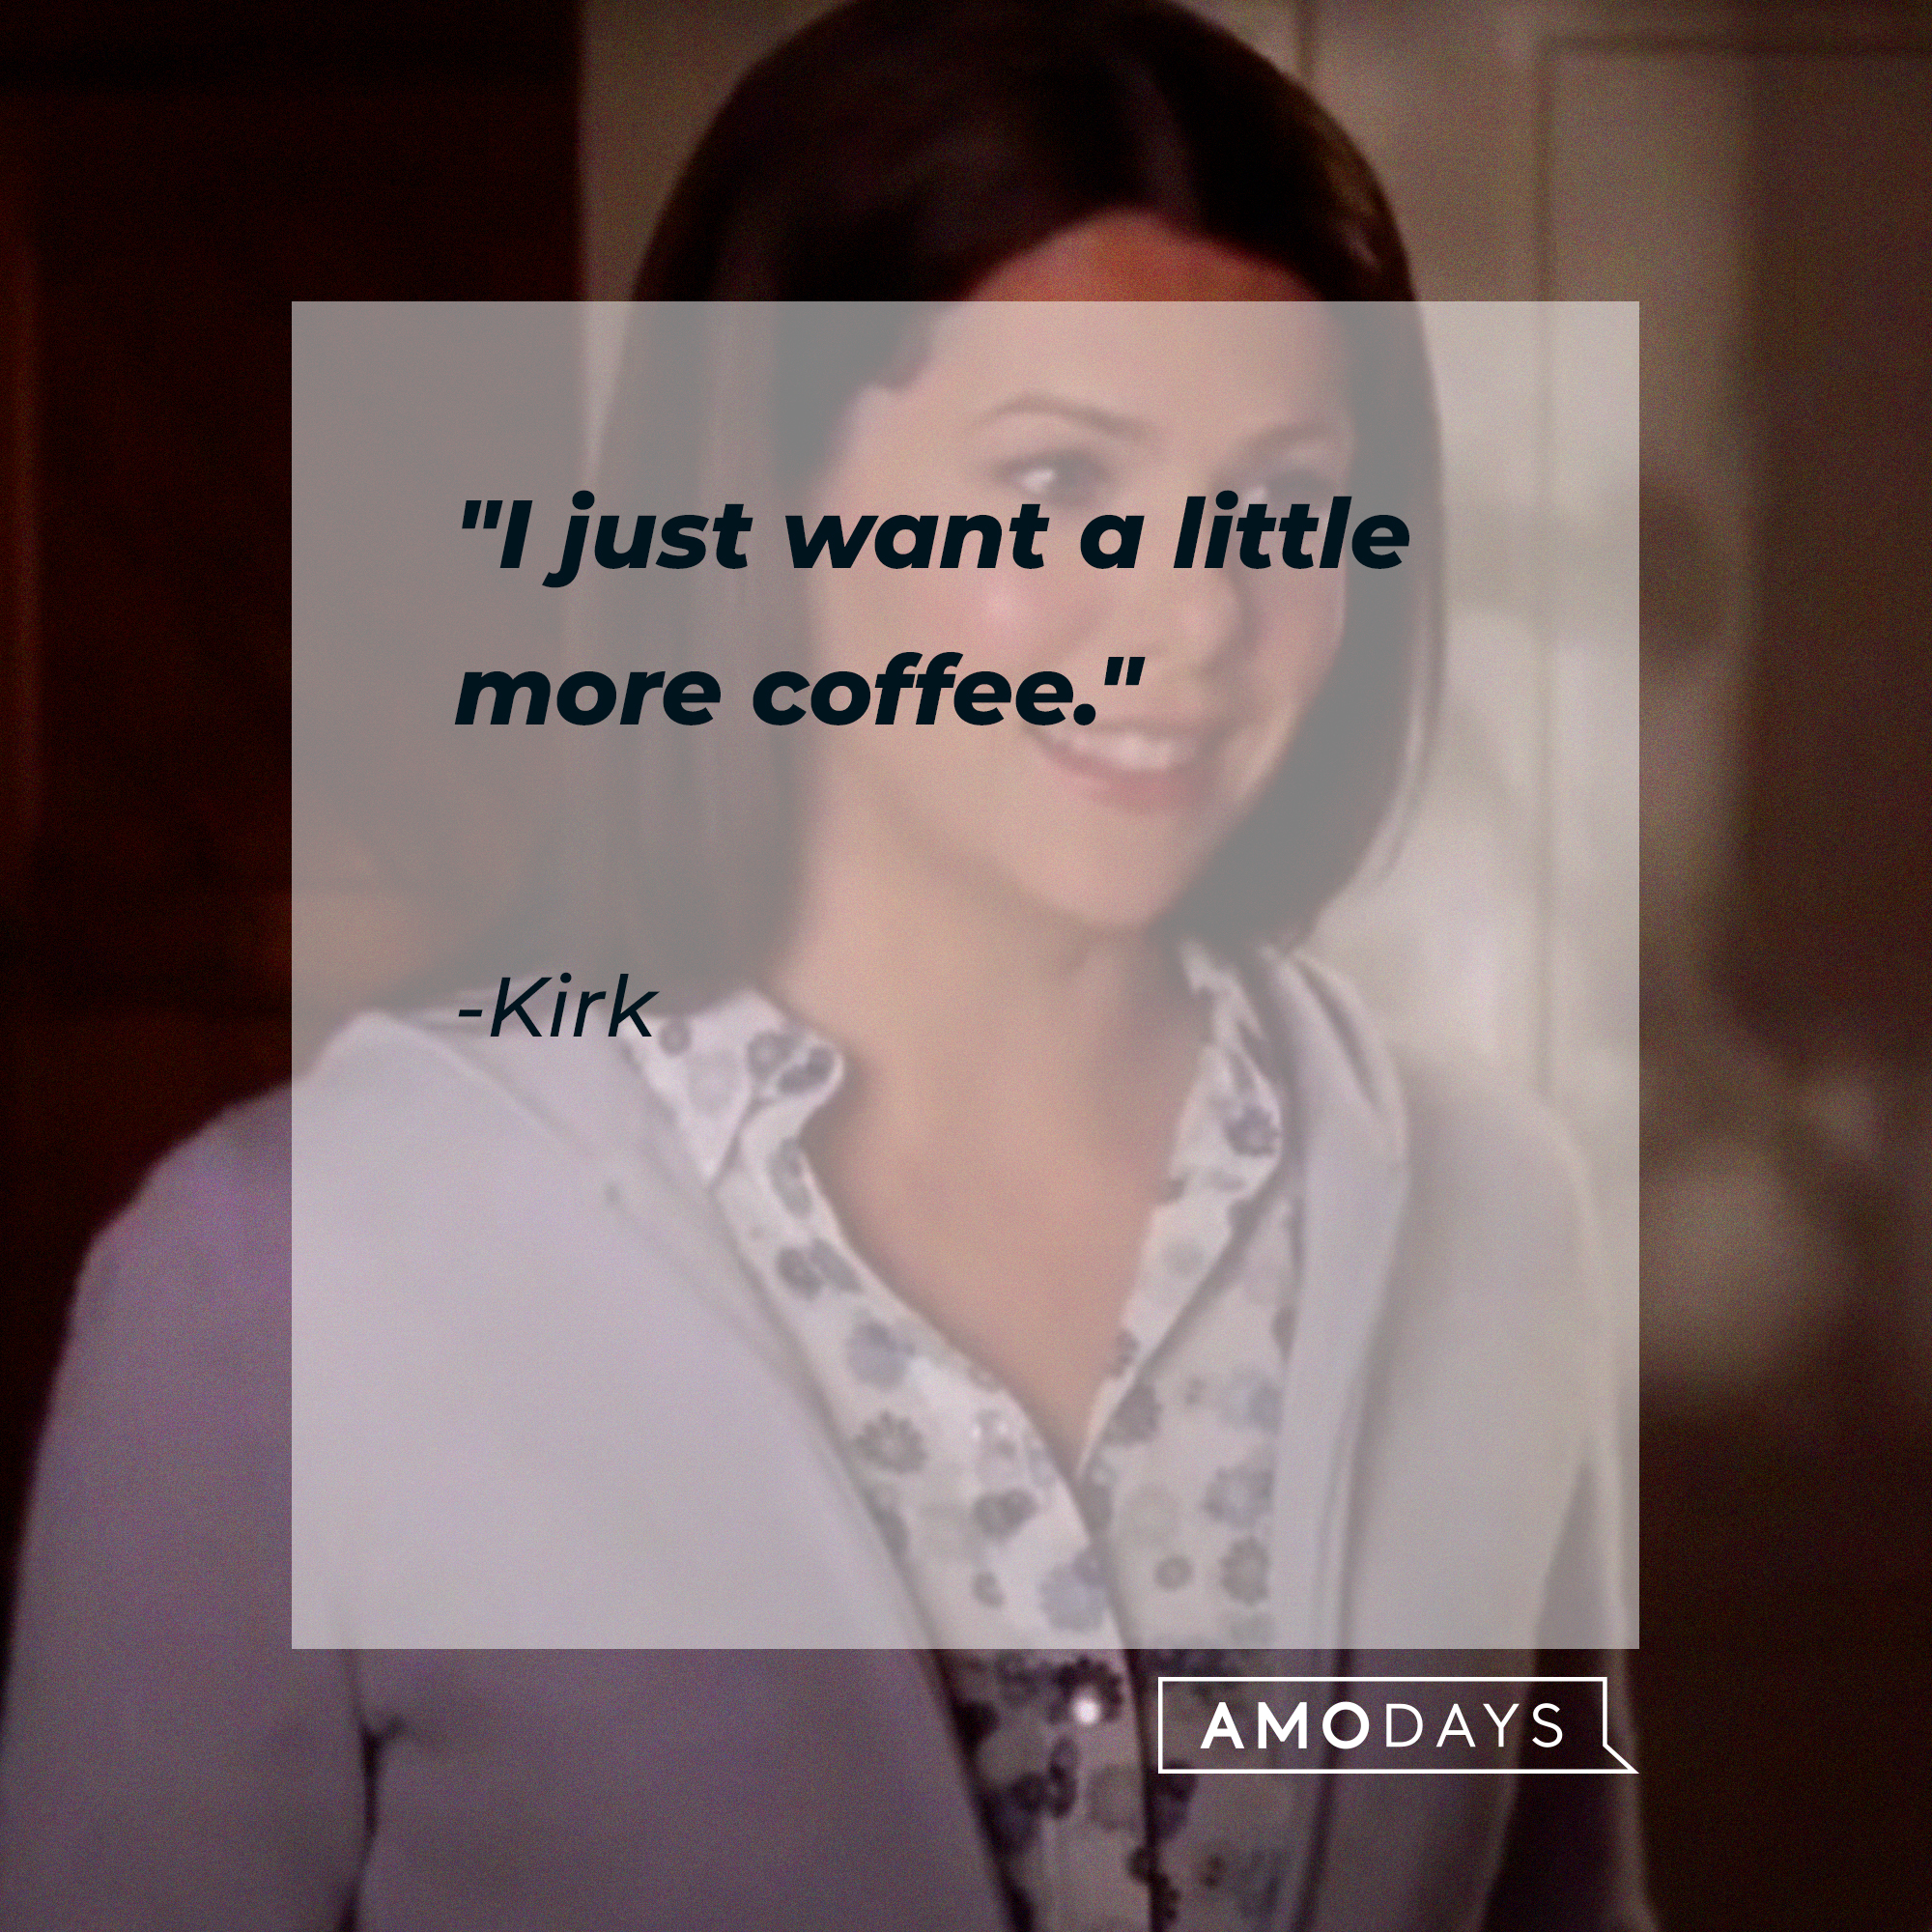 Kirk's quote: "I just want a little more coffee." | Source: facebook.com/GilmoreGirls